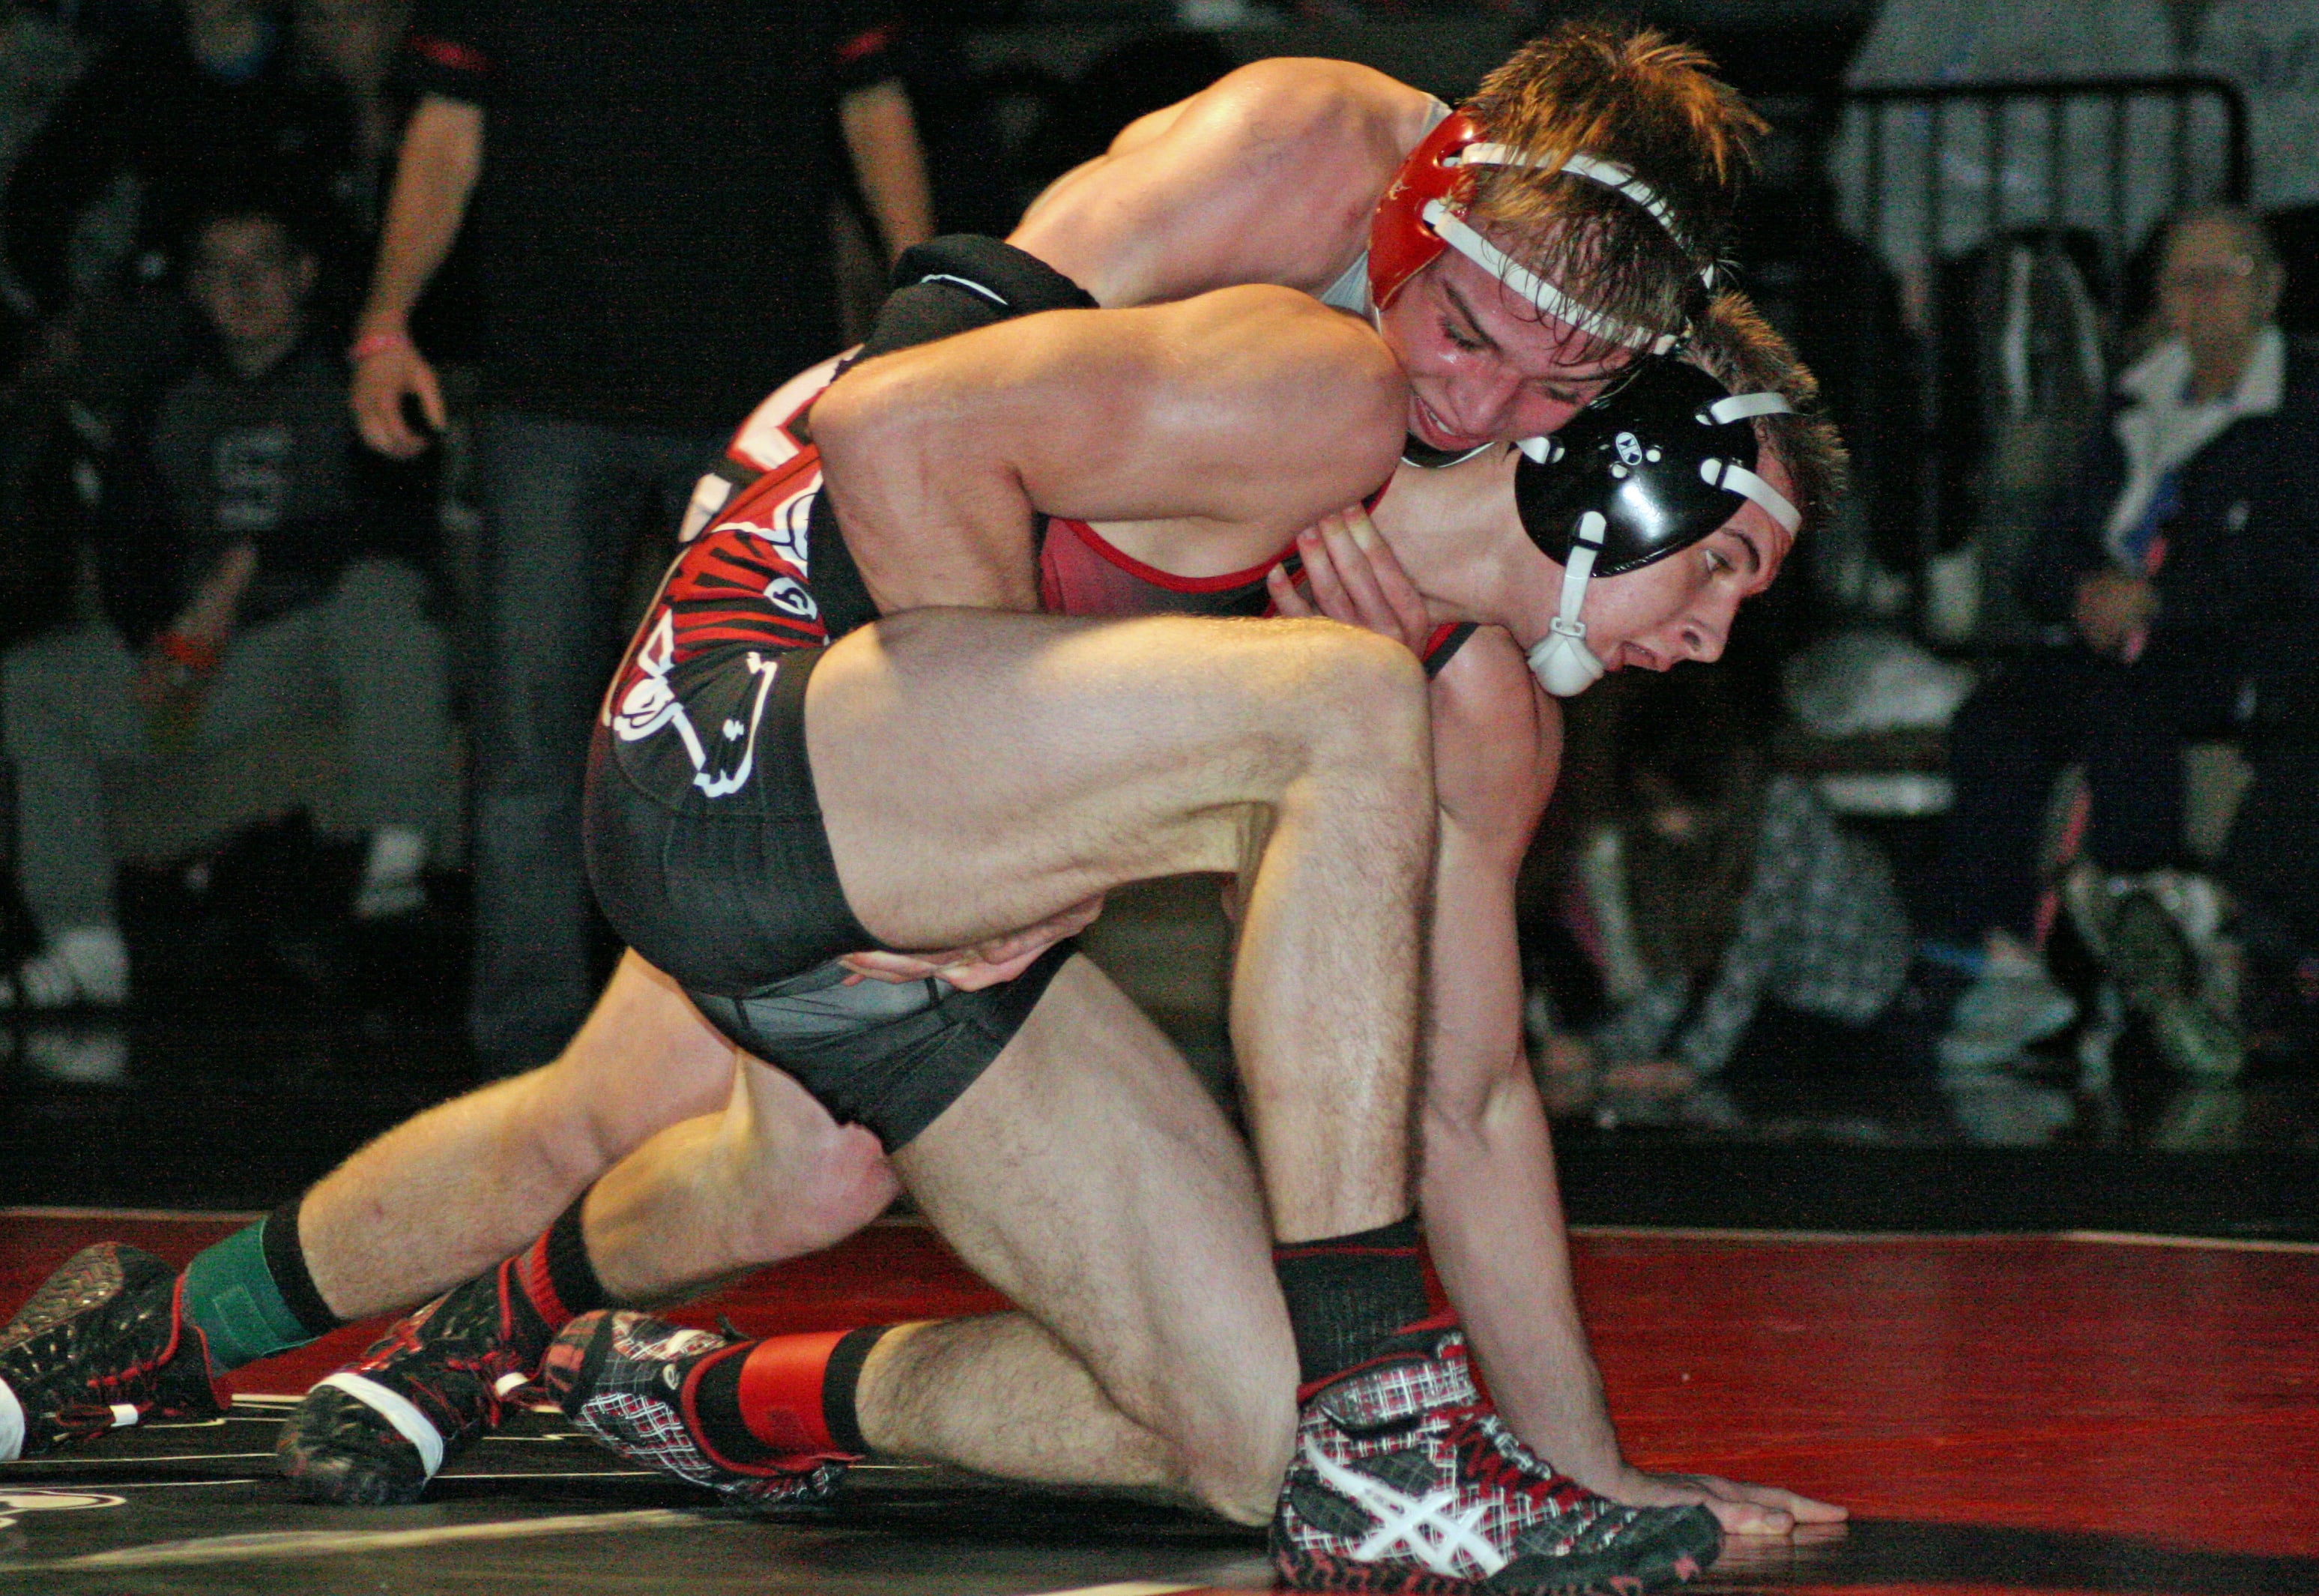 This battle extended into three overtime periods, before Tommy Strassenberg beat Bryant Elliott 5-4.